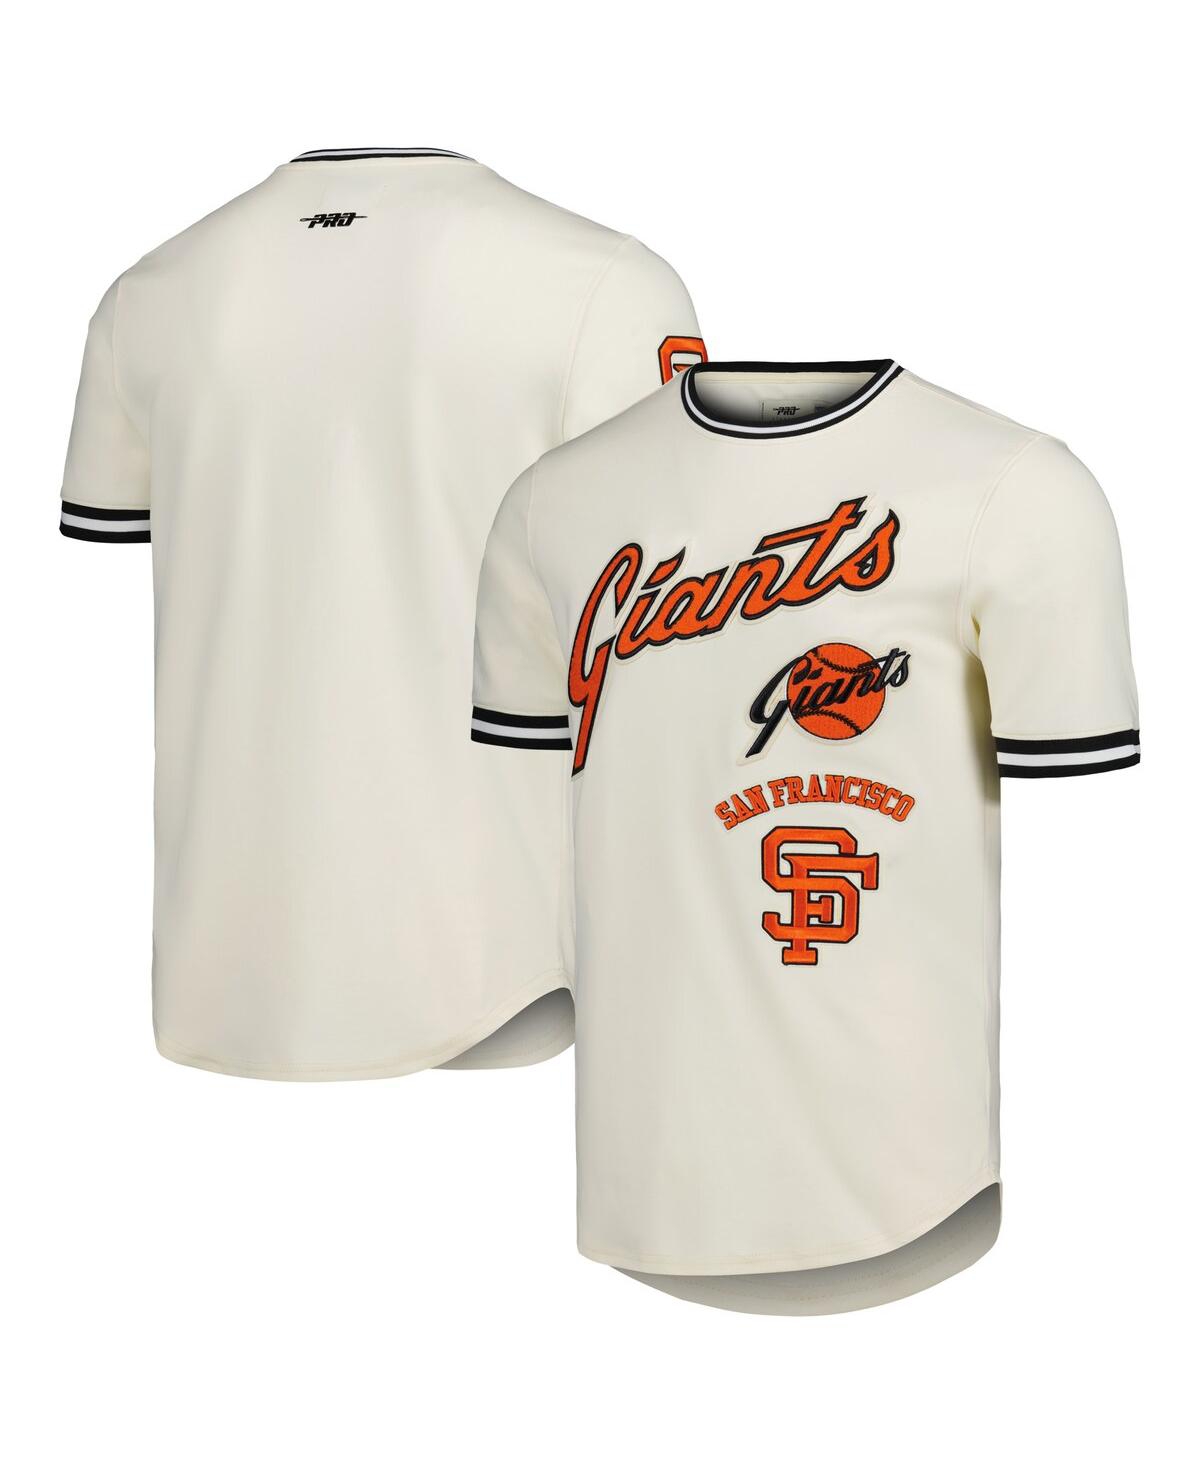 Pro Standard Men's  Cream San Francisco Giants Cooperstown Collection Retro Classic T-shirt